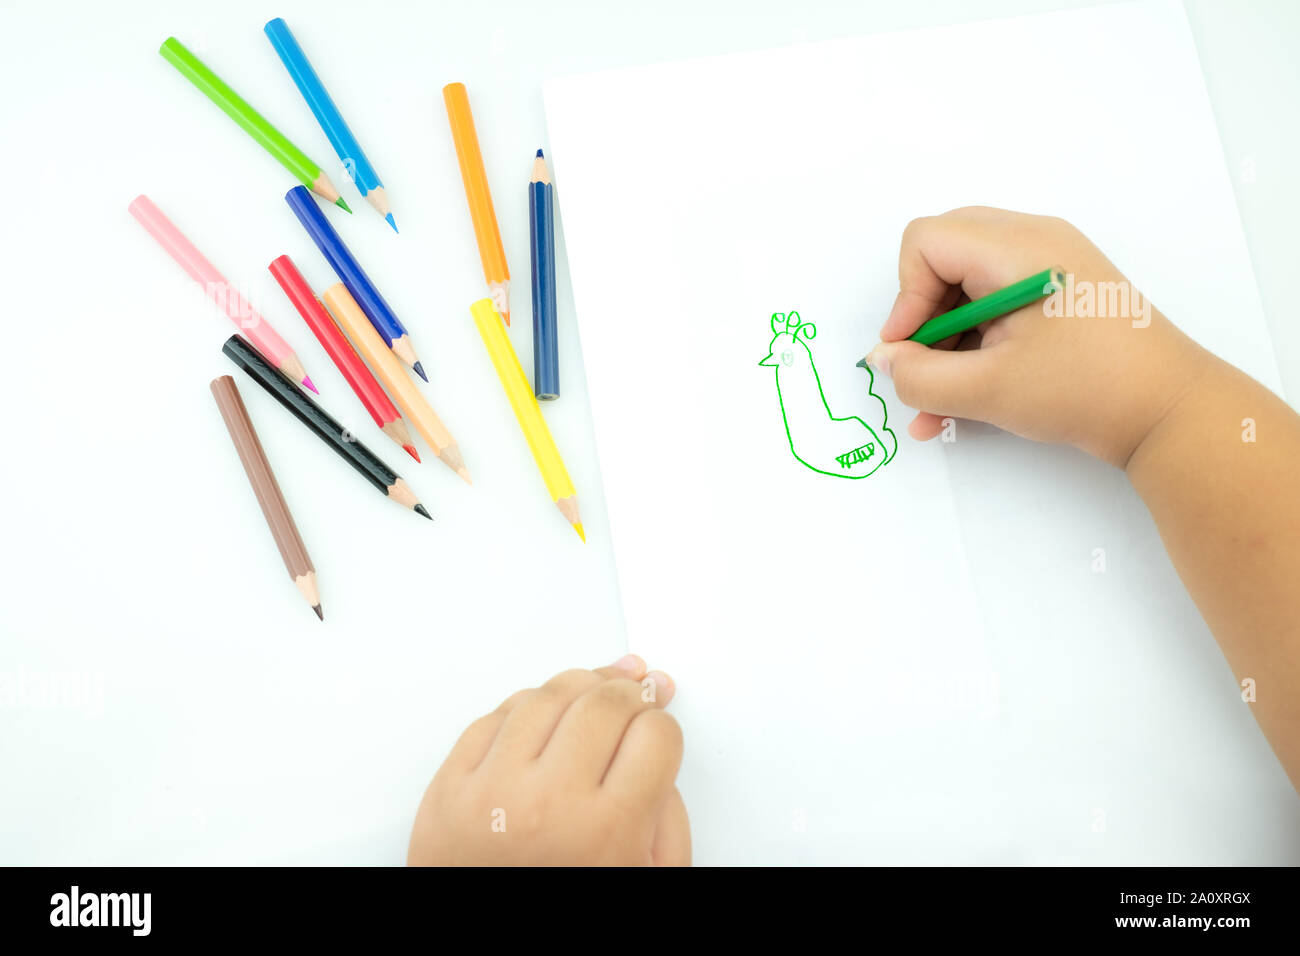 Children draw paints in the playroom, A child is holding a crayon in his hands at paper and crayons for drawing on the table, Hand Kids drawings,  chi Stock Photo